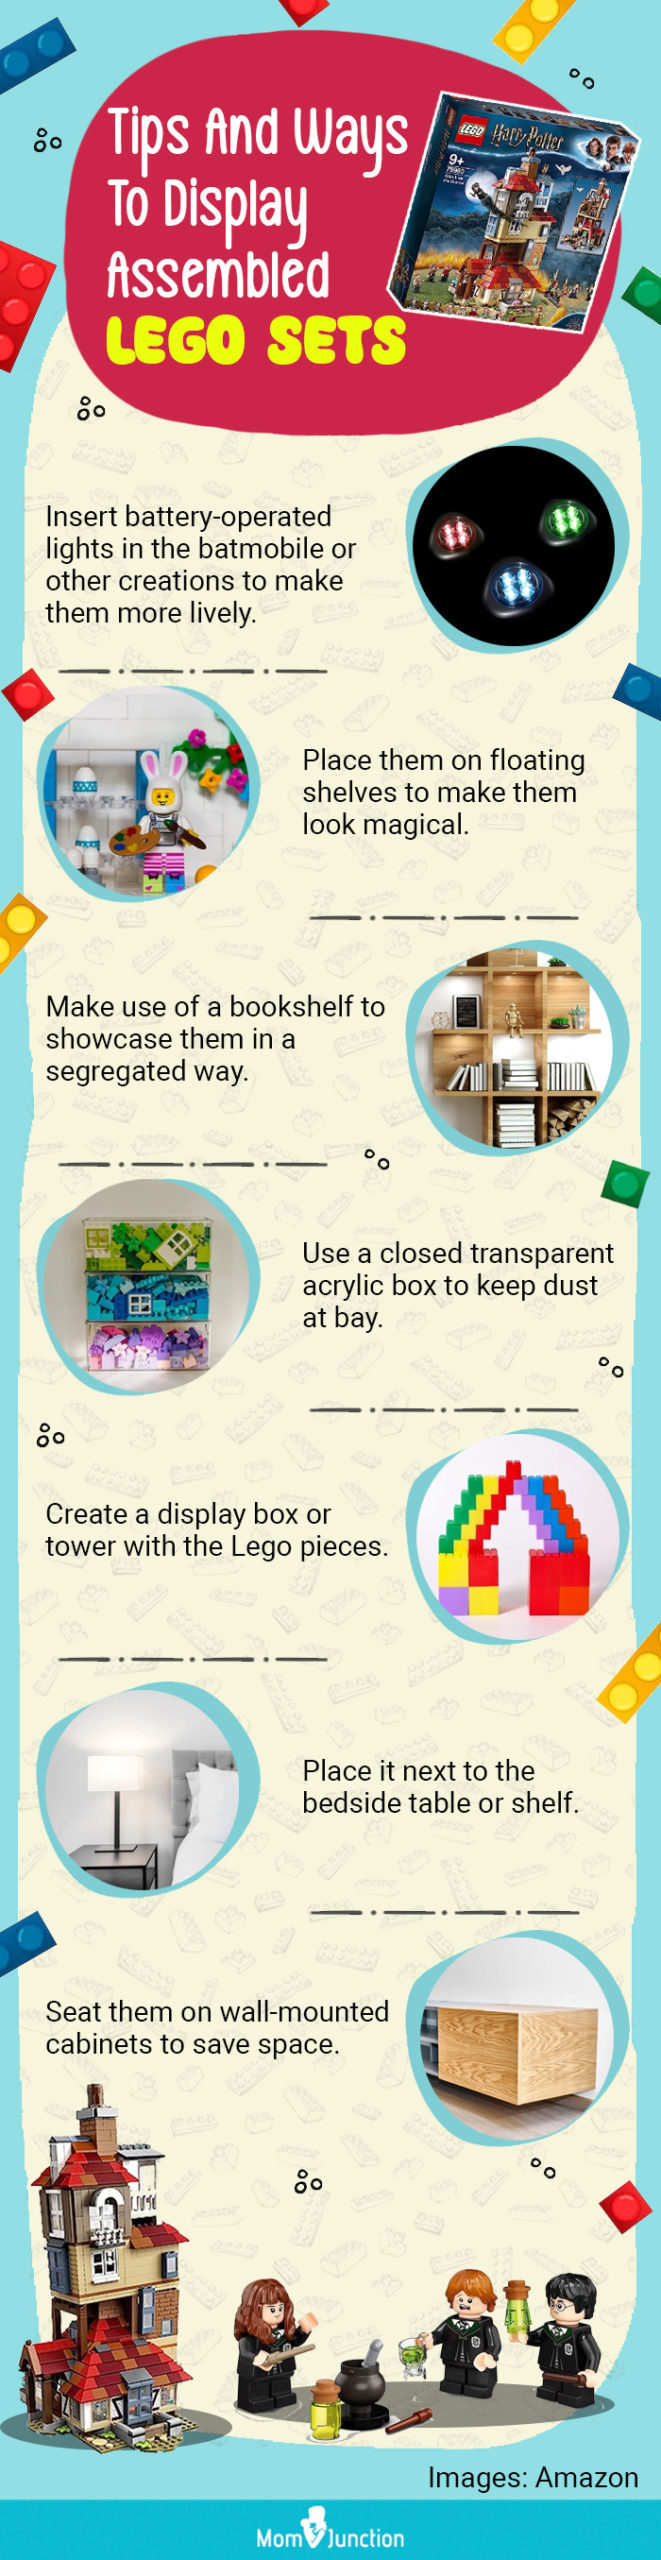 Tips And Ways To Display Assembled Lego Sets (infographic)